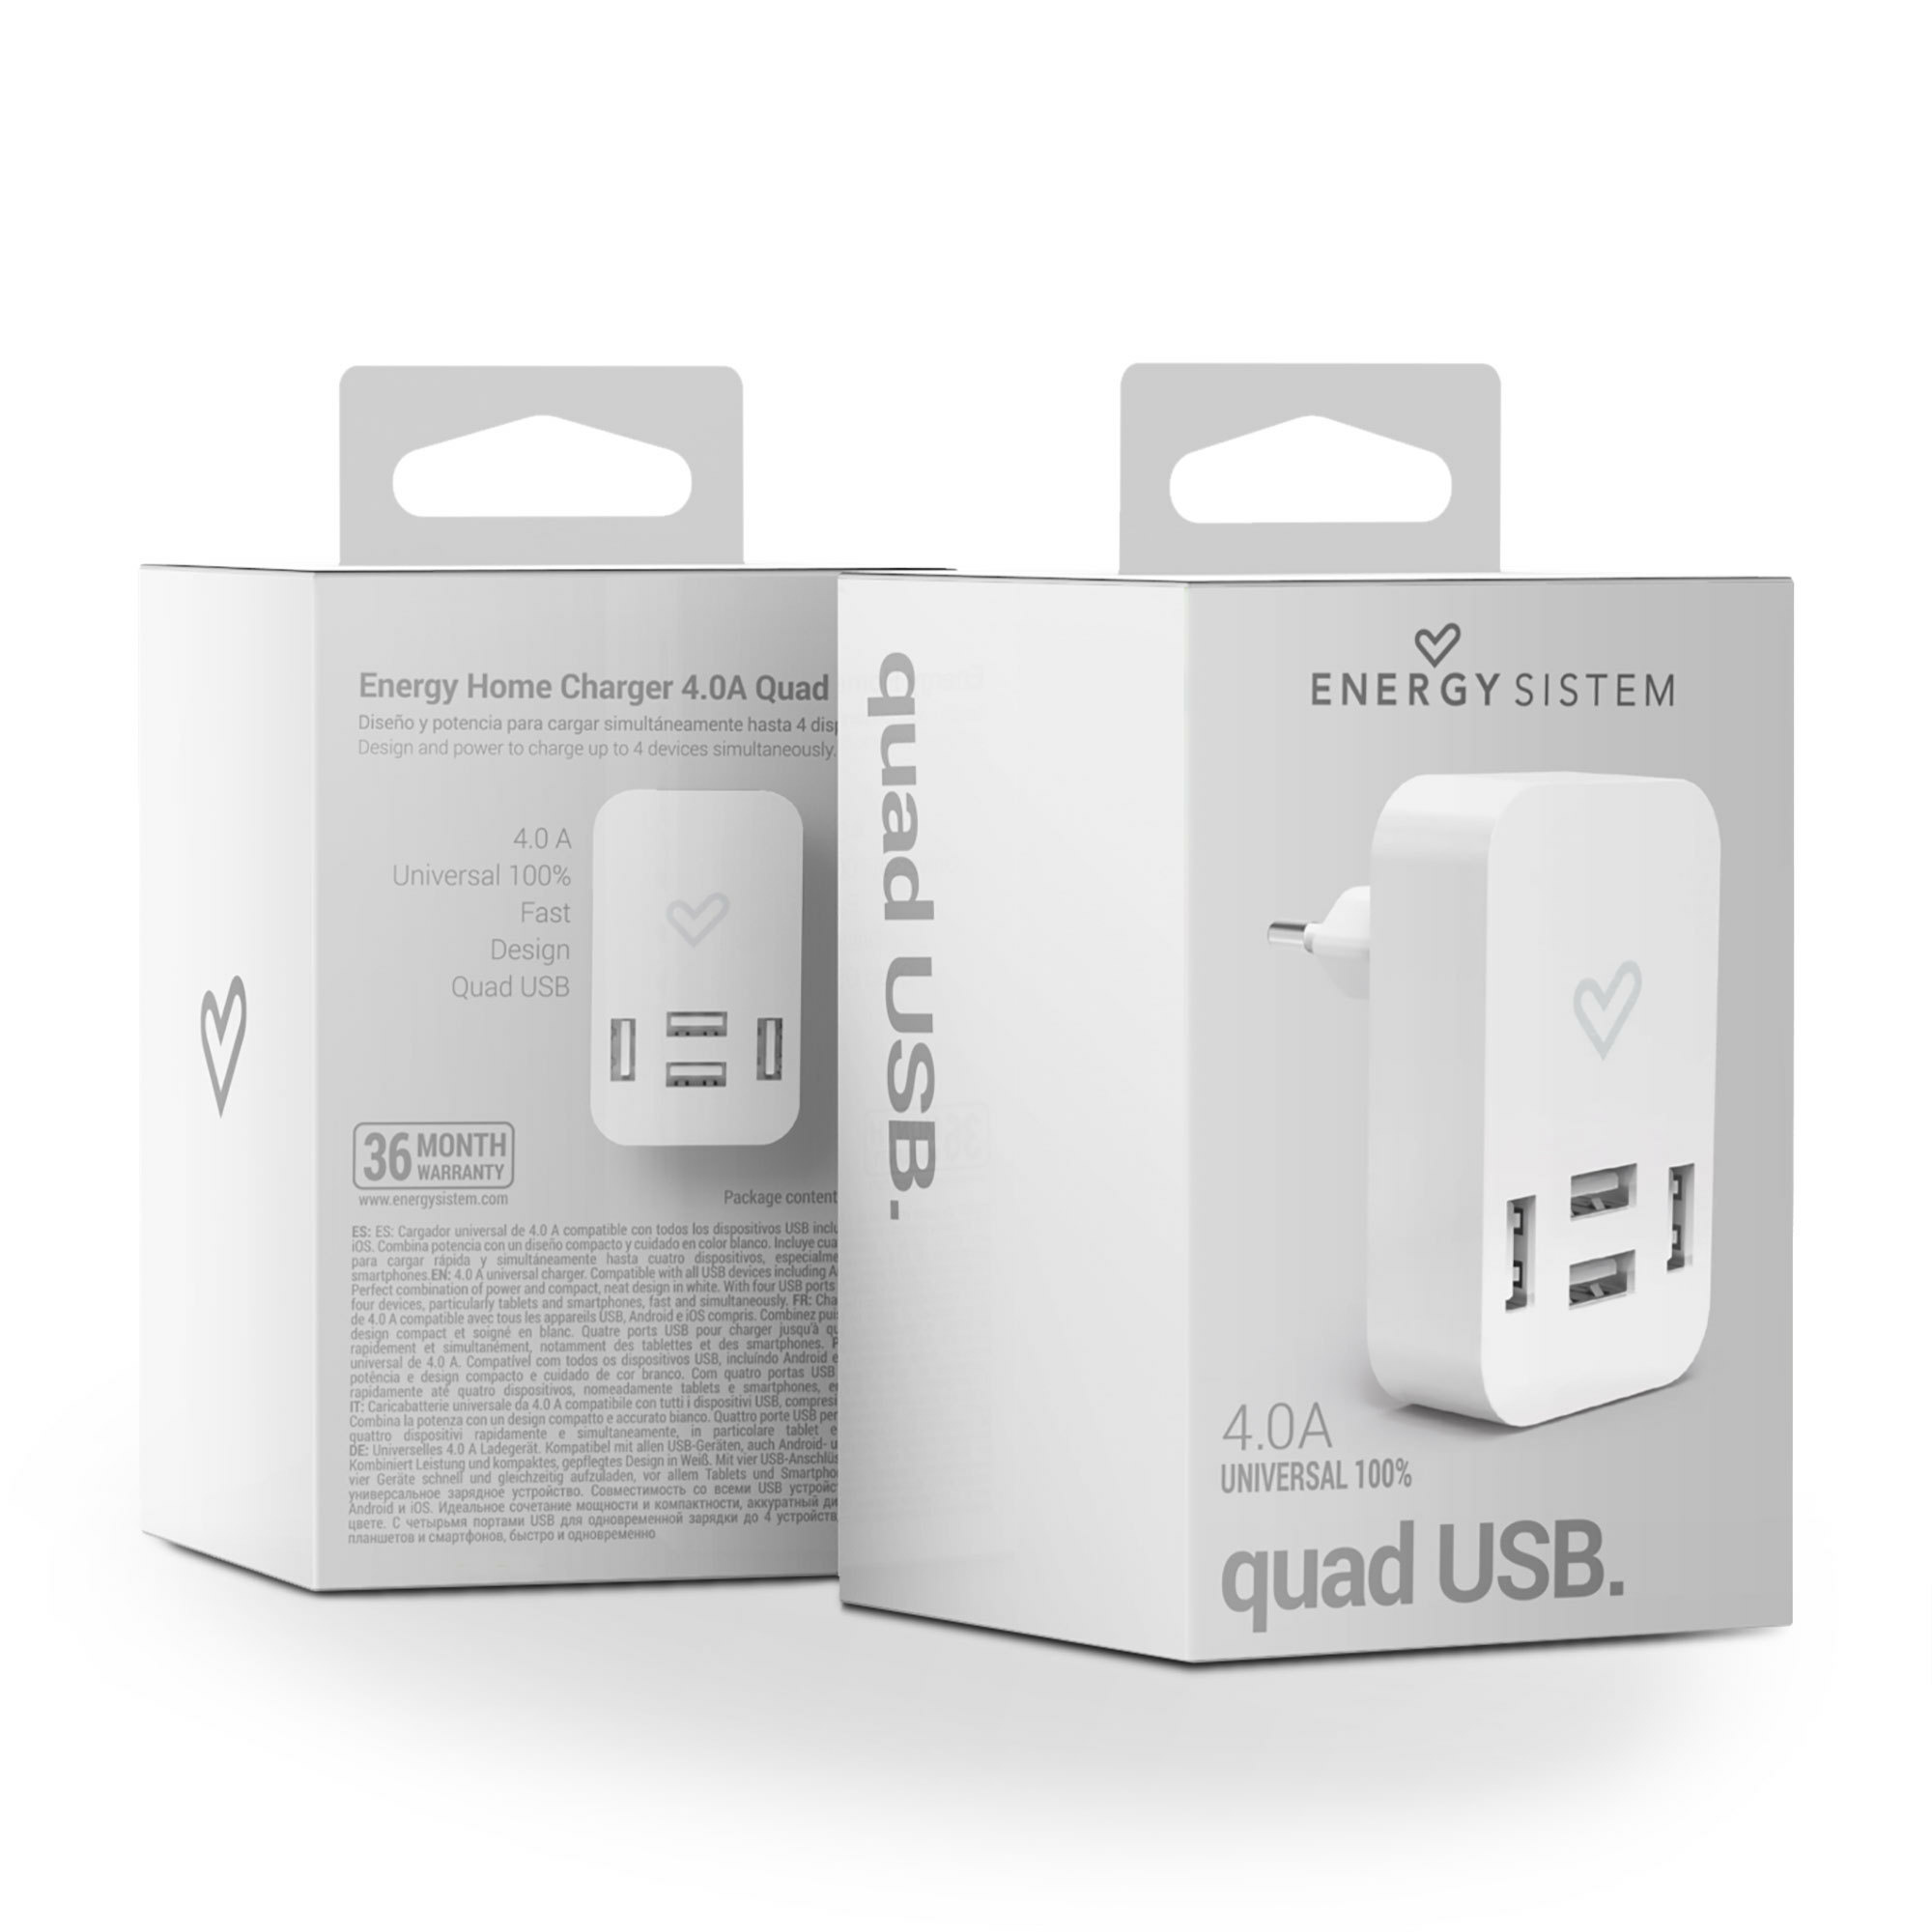 Emballage du Energy Home Charger 4.0A Quad USB